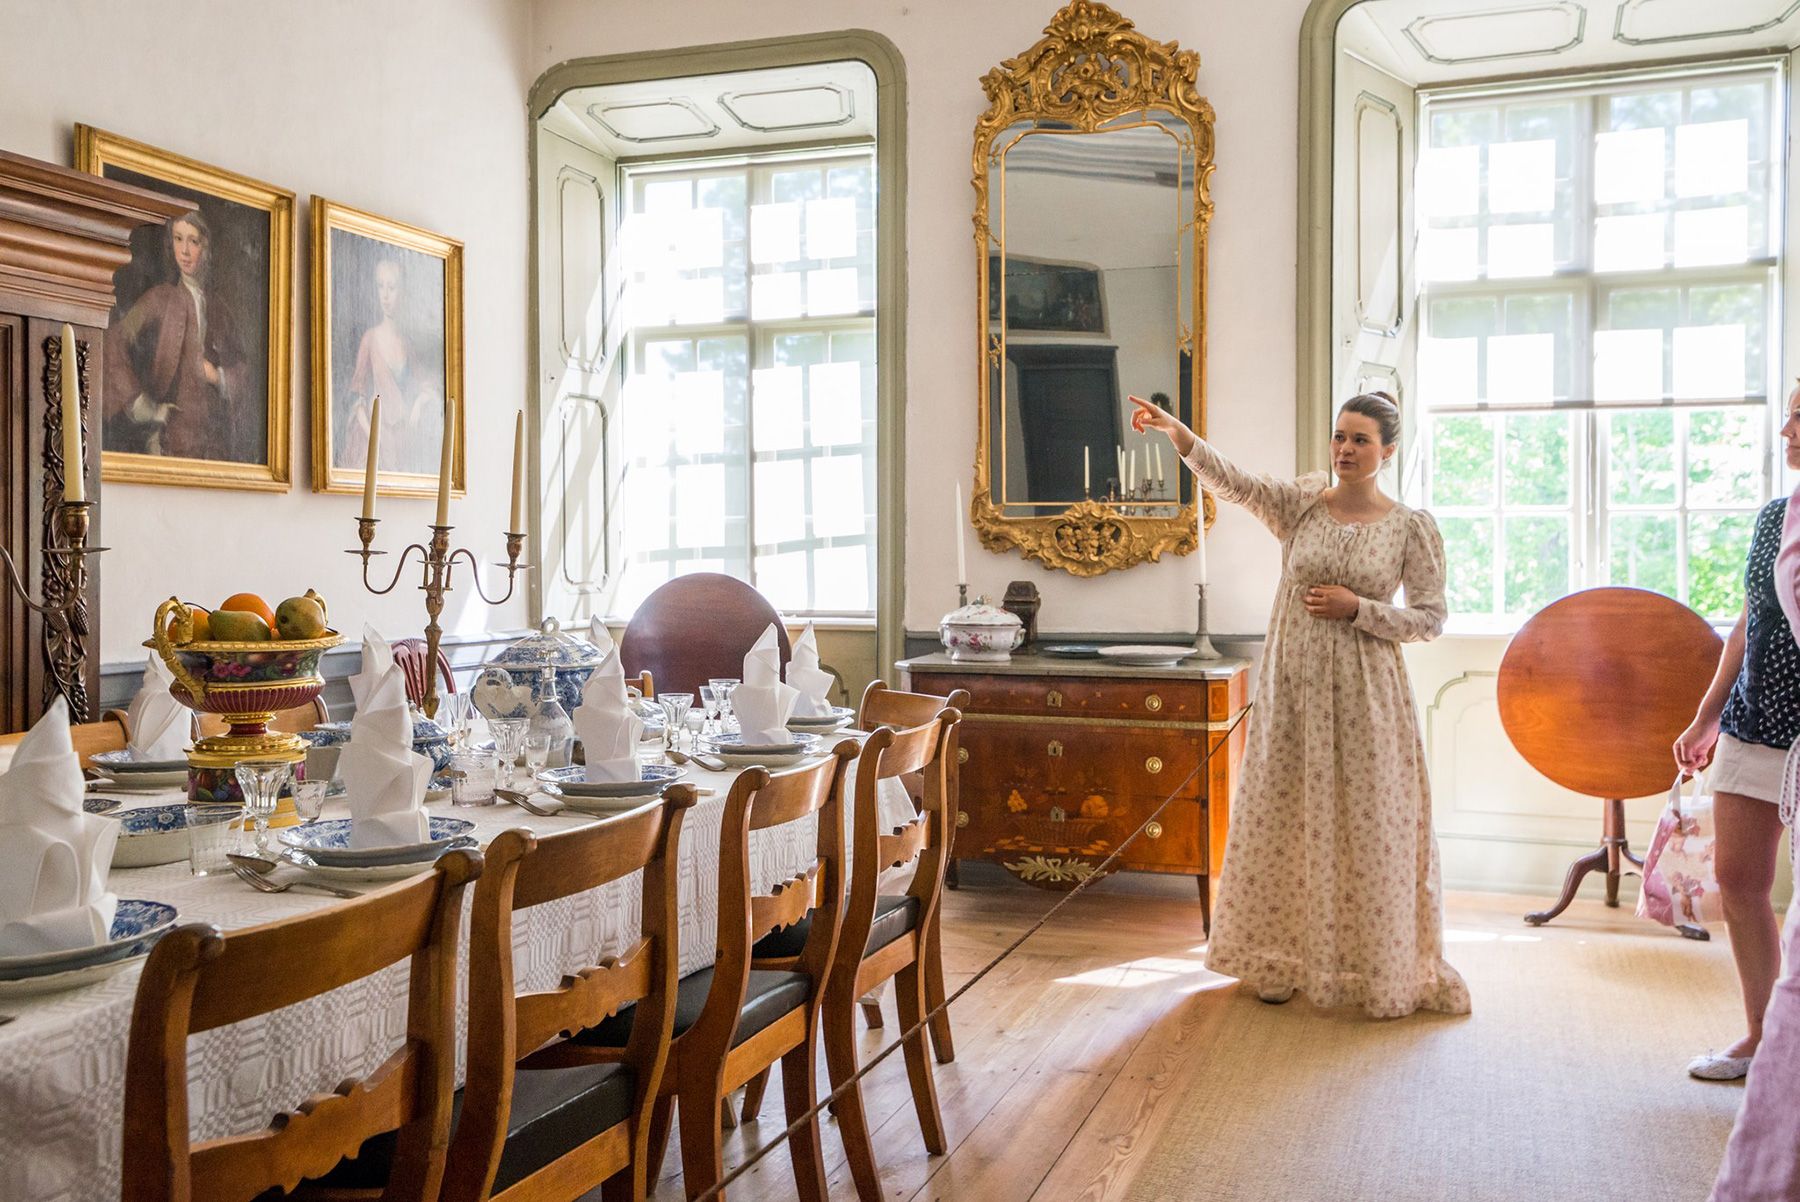 A tour guide dressed in a long white noblewoman's dress at Louhisaari Manor shares stories about the history of the dining room. There are paintings and mirrors on the walls and the table is laid beautifully.